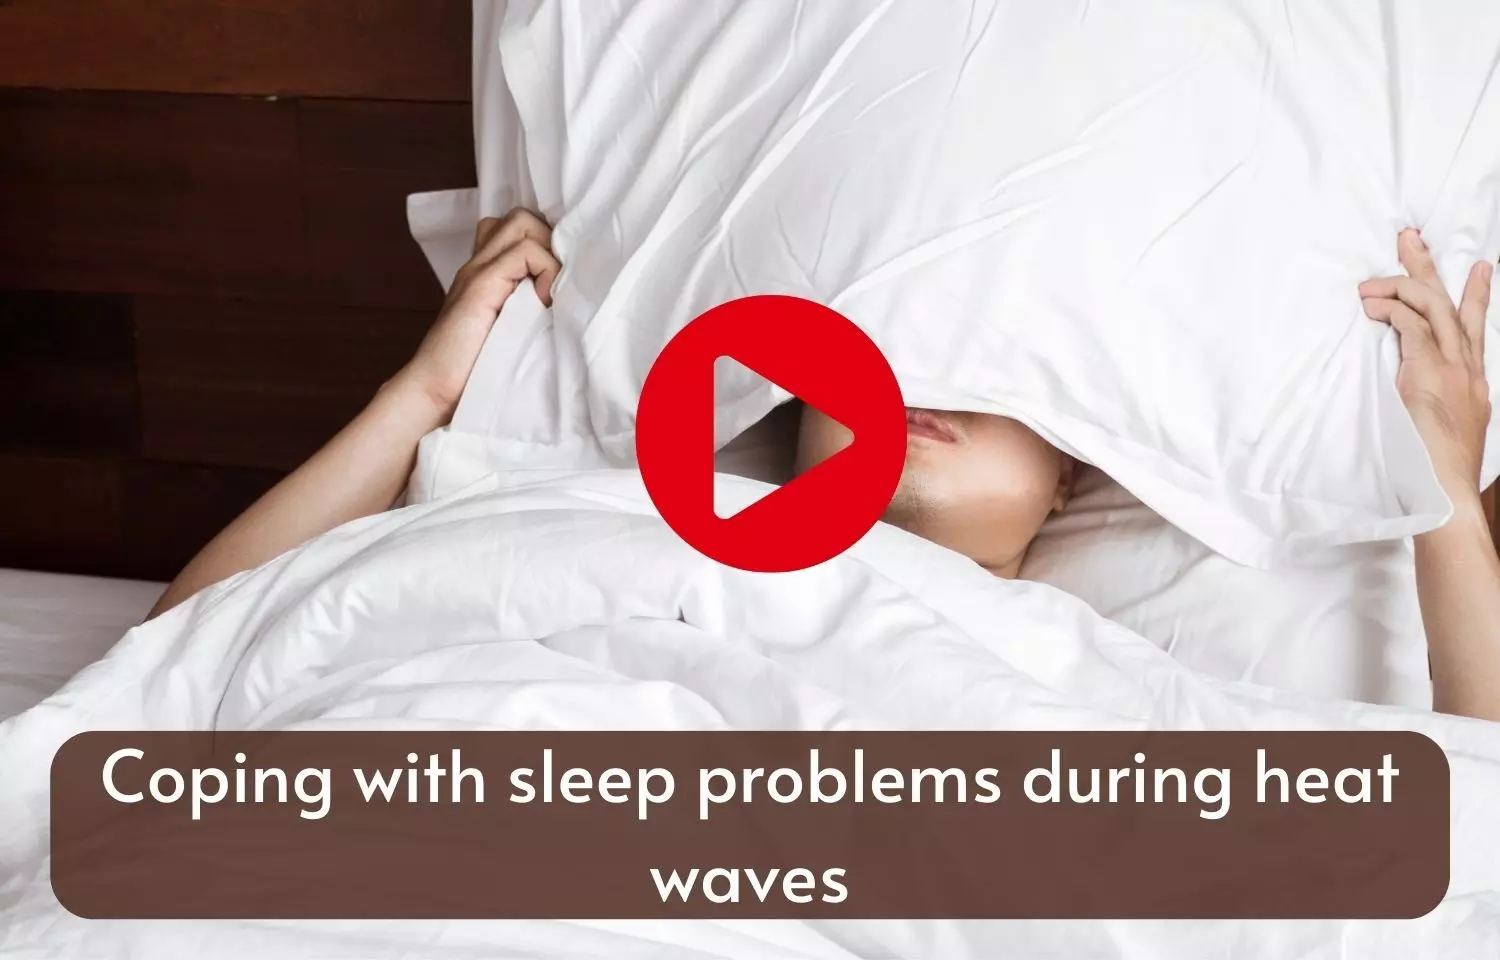 Coping with sleep problems during heat waves